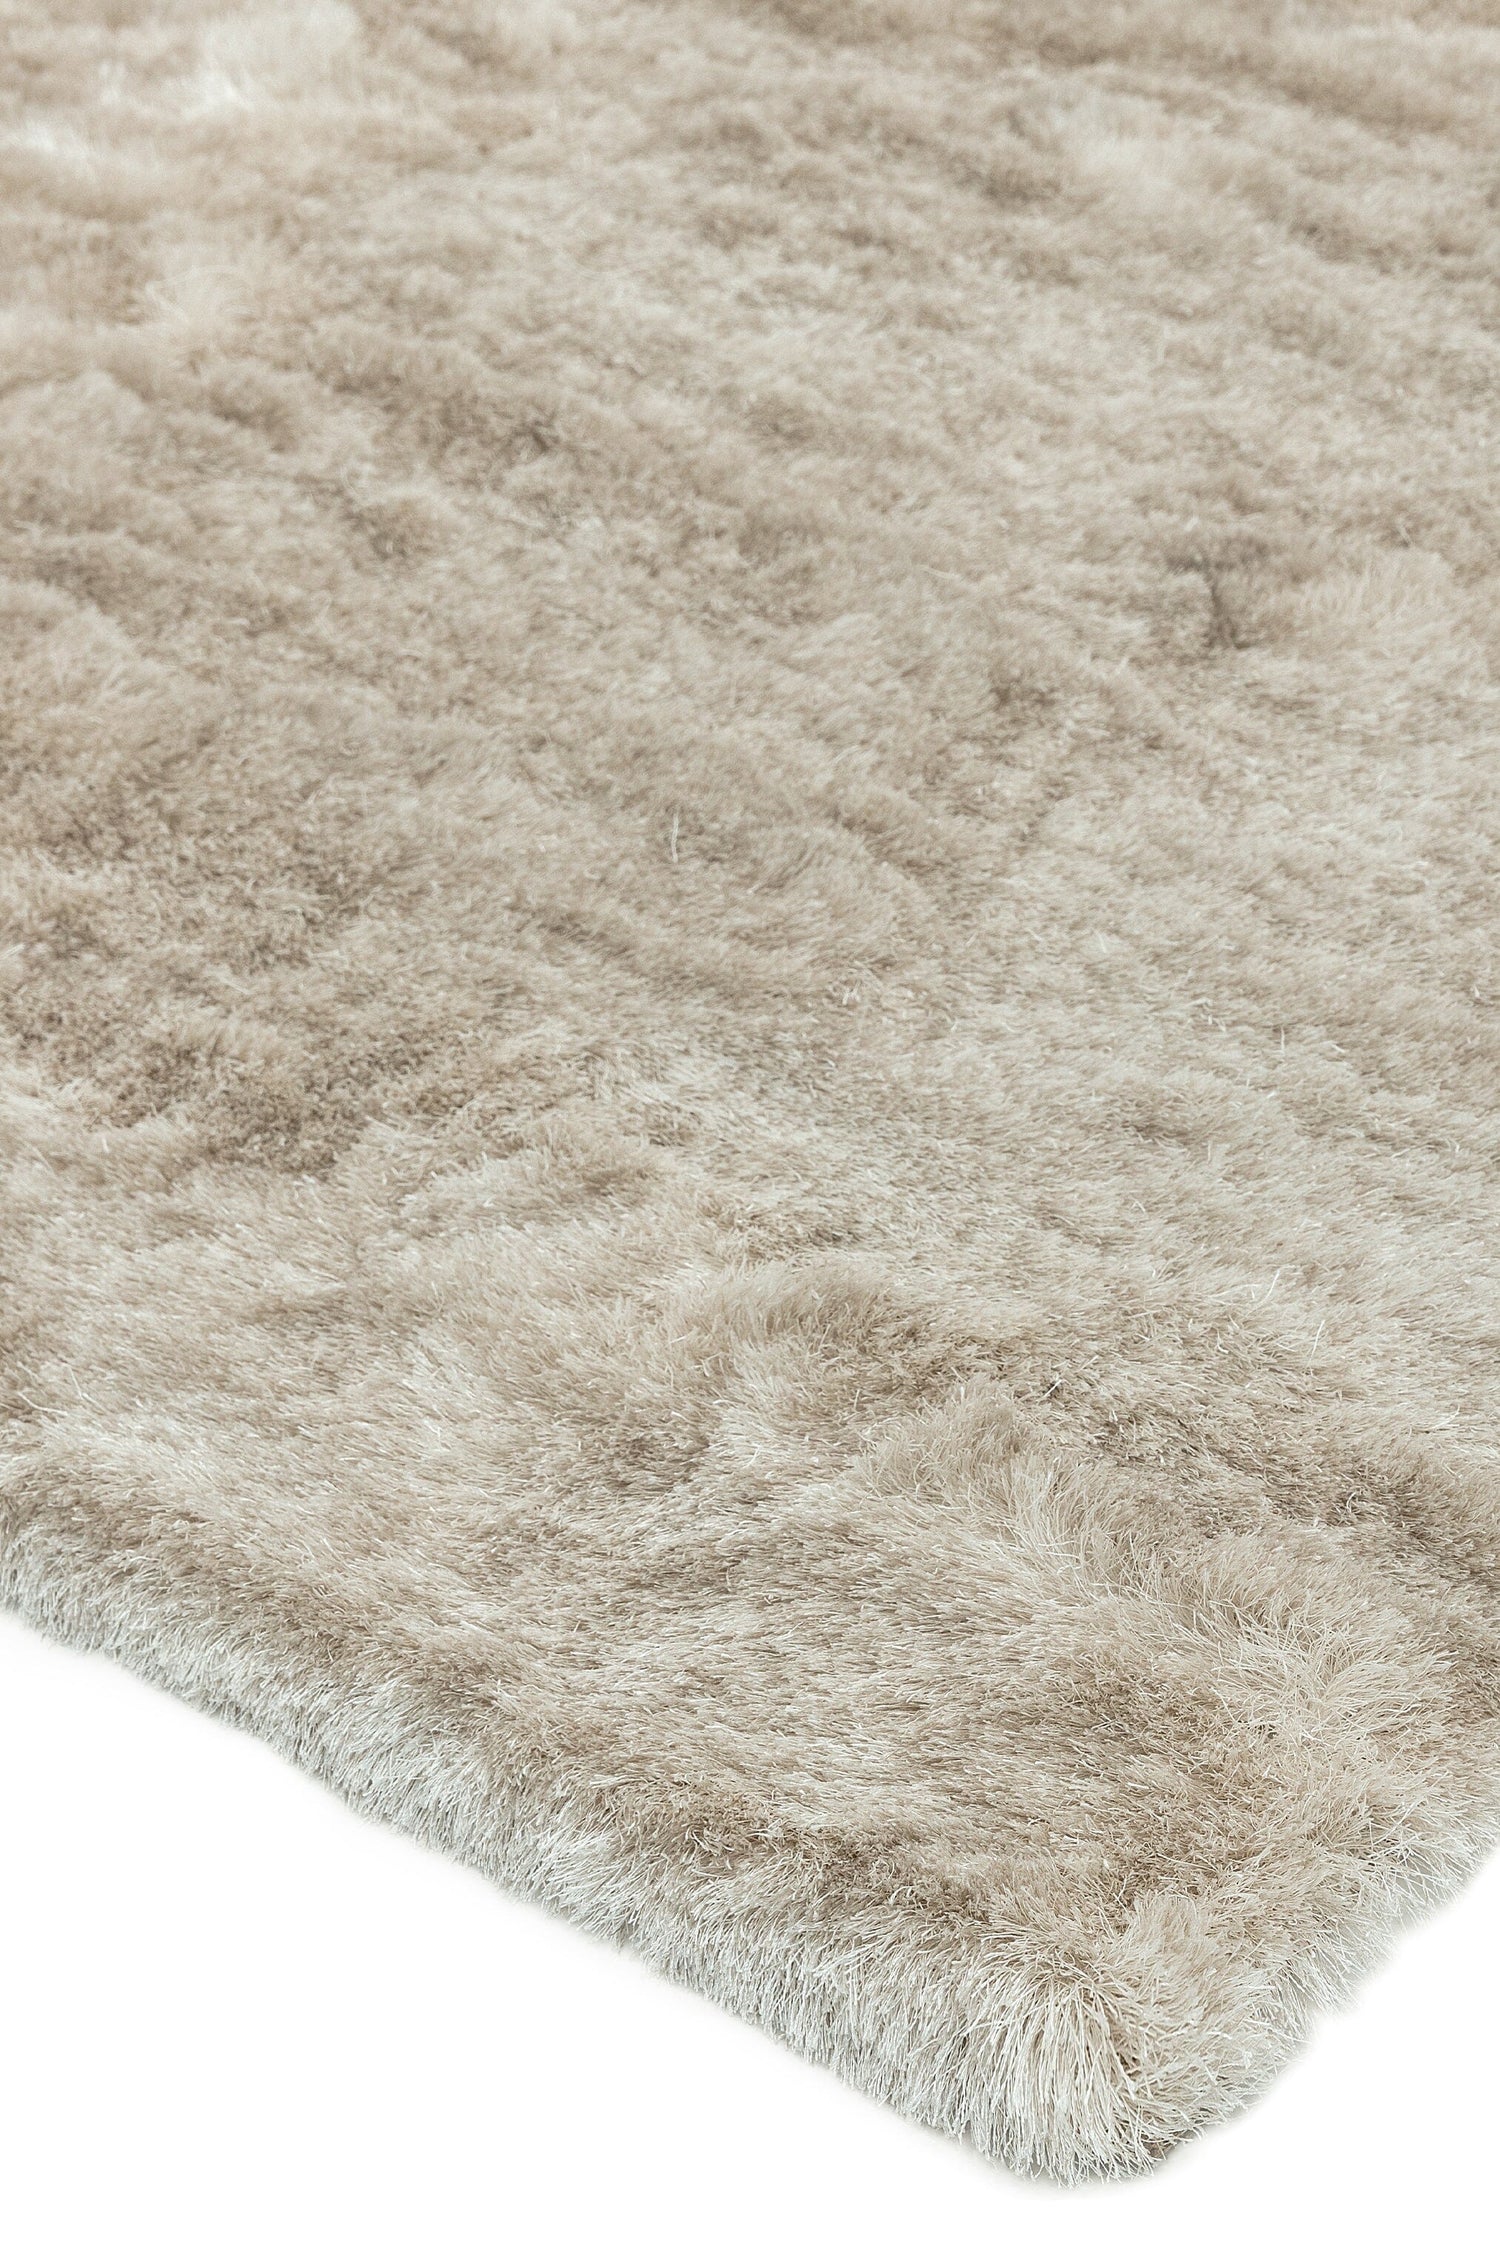  Asiatic Carpets-Asiatic Carpets Whisper Table Tufted Rug Champagne - 65 x 135cm-Beige, Natural 605 